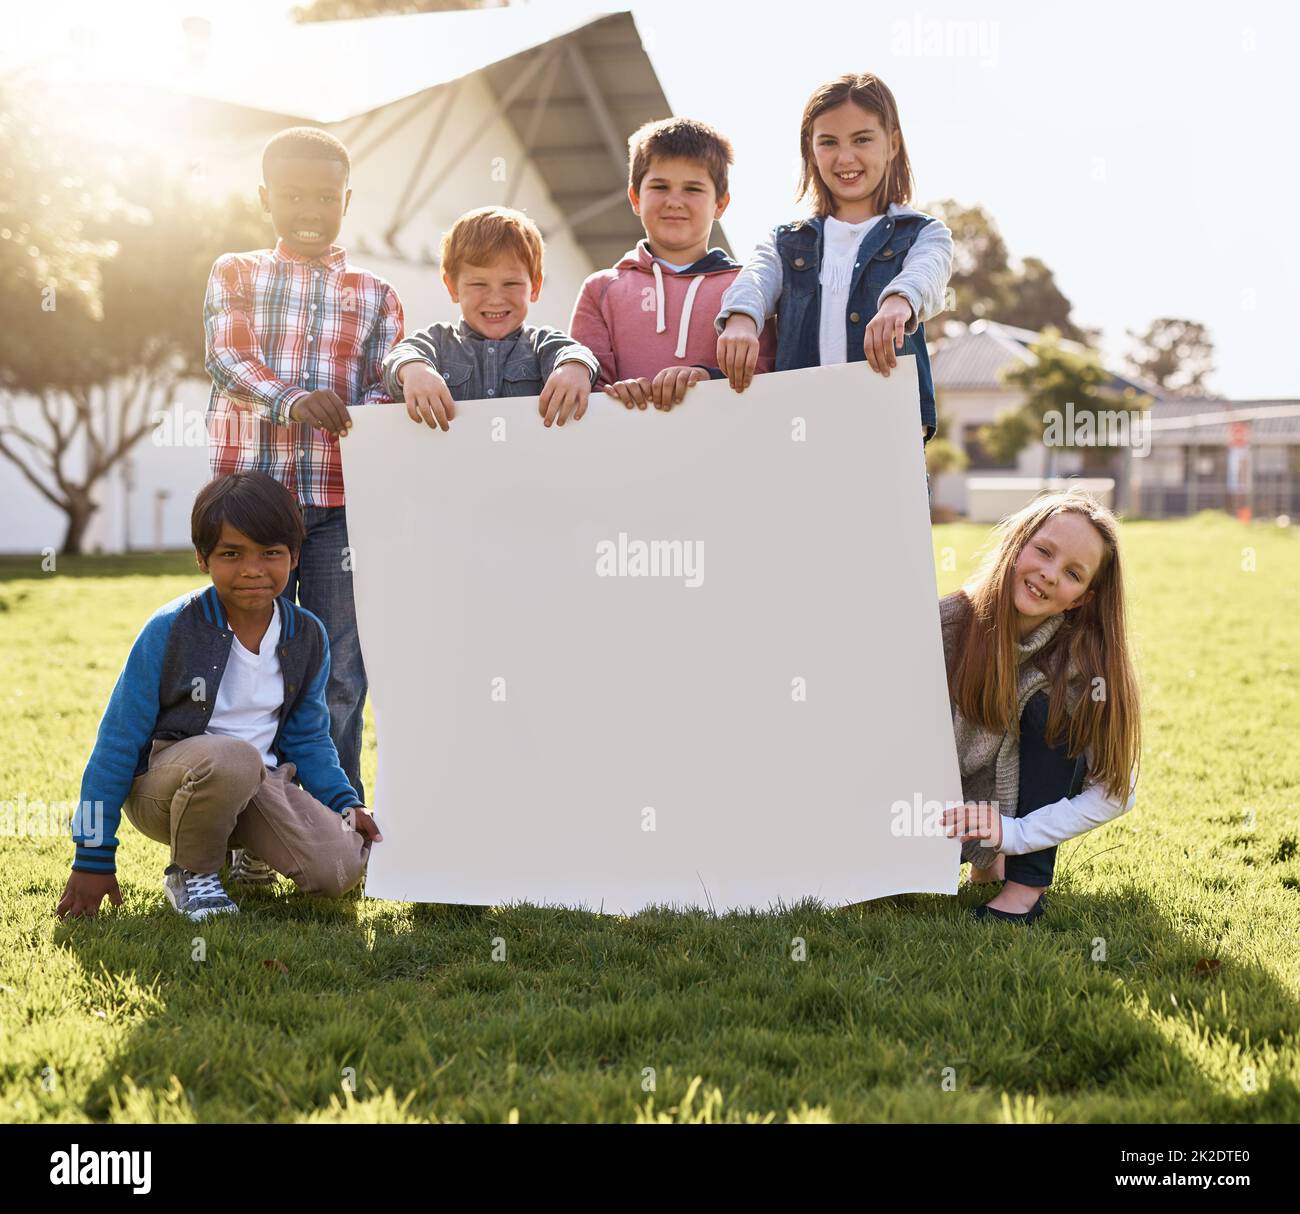 Holding up your message for their future. Shot of young kids playing together outdoors. Stock Photo